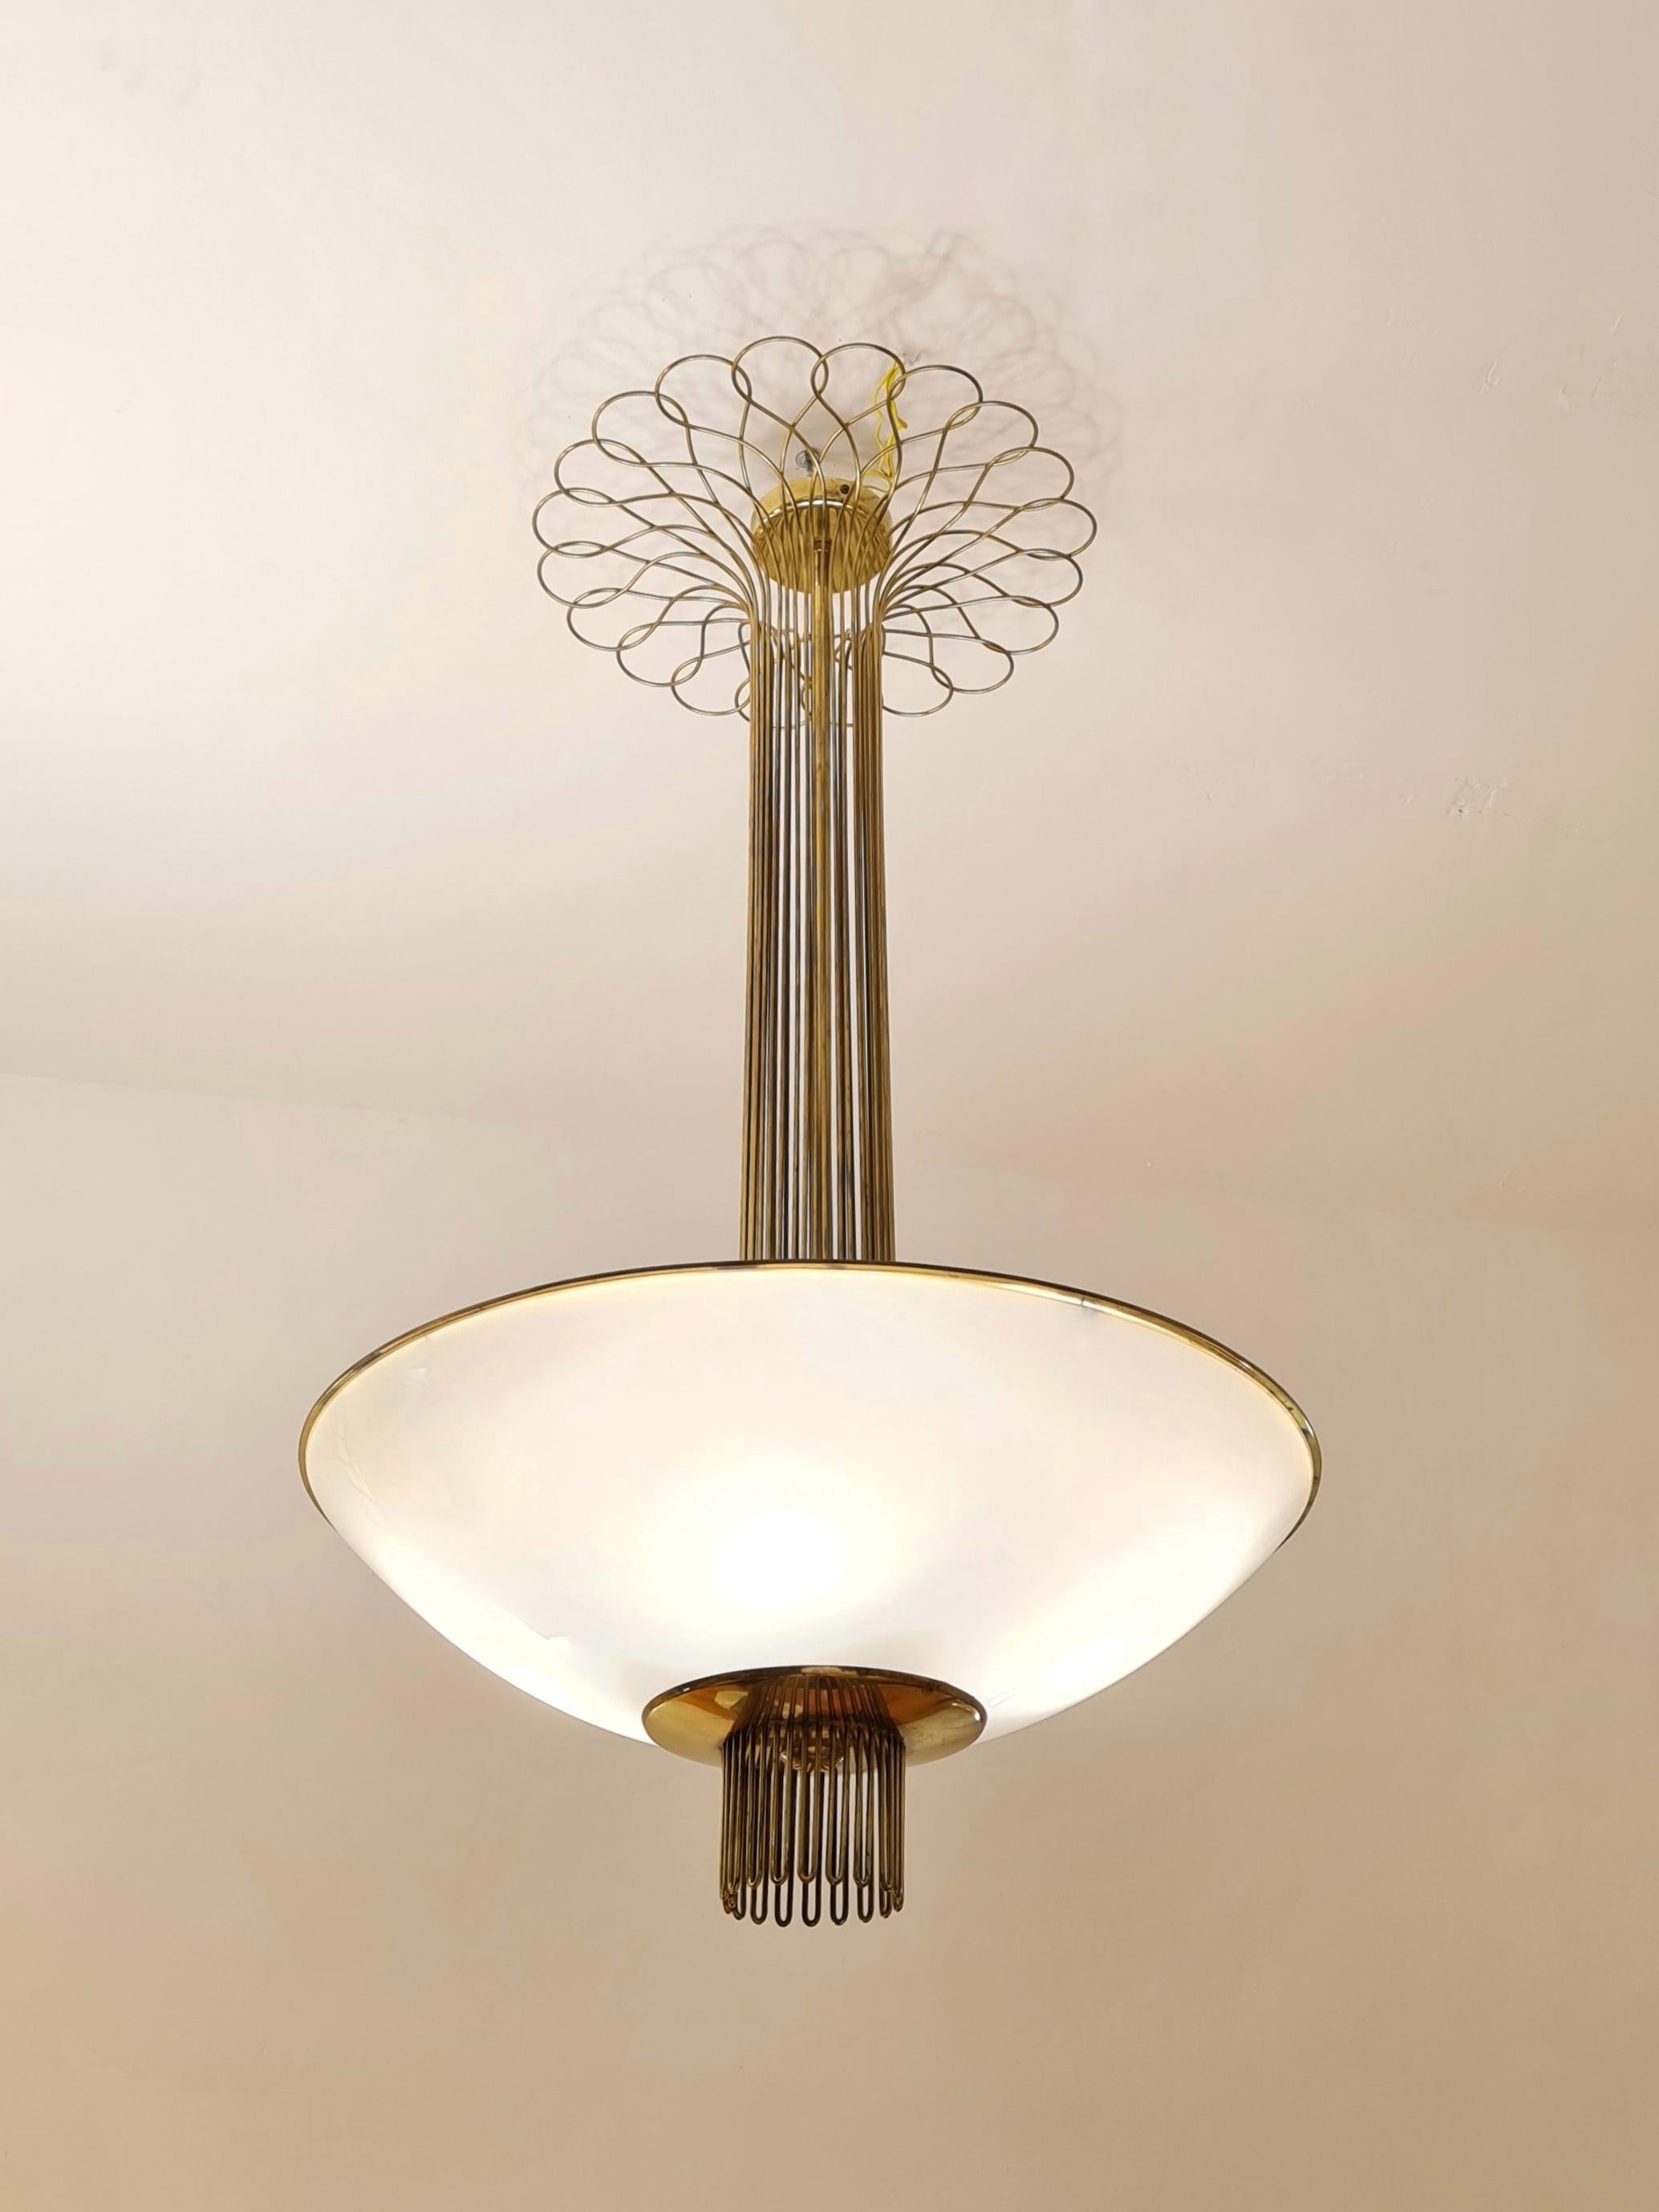 Provenance :- This beautiful ceiling lamp by Paavo Tynell was designed for the MTK seminar building `Northern Lights Street 9`. It was of course manufactured by Taito between 1950-1953. Paavo Tynell and Ilmari Tapiovaara designed the lightings and